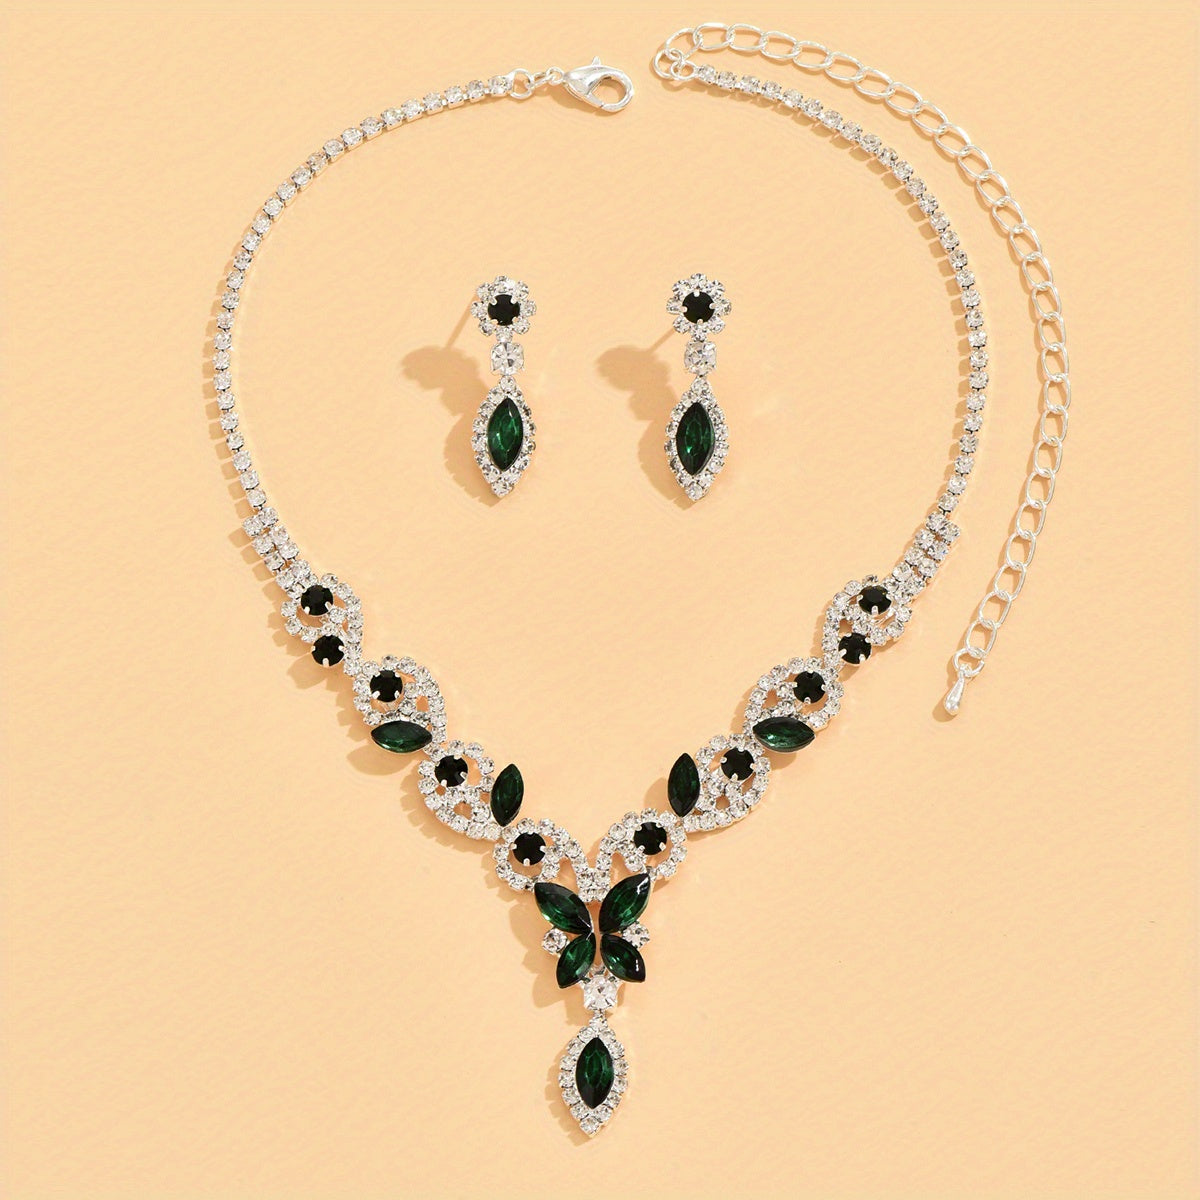 Versatile Jewelry Set With Pendant Necklace & Drop Earrings Sparkly Jewelry Set